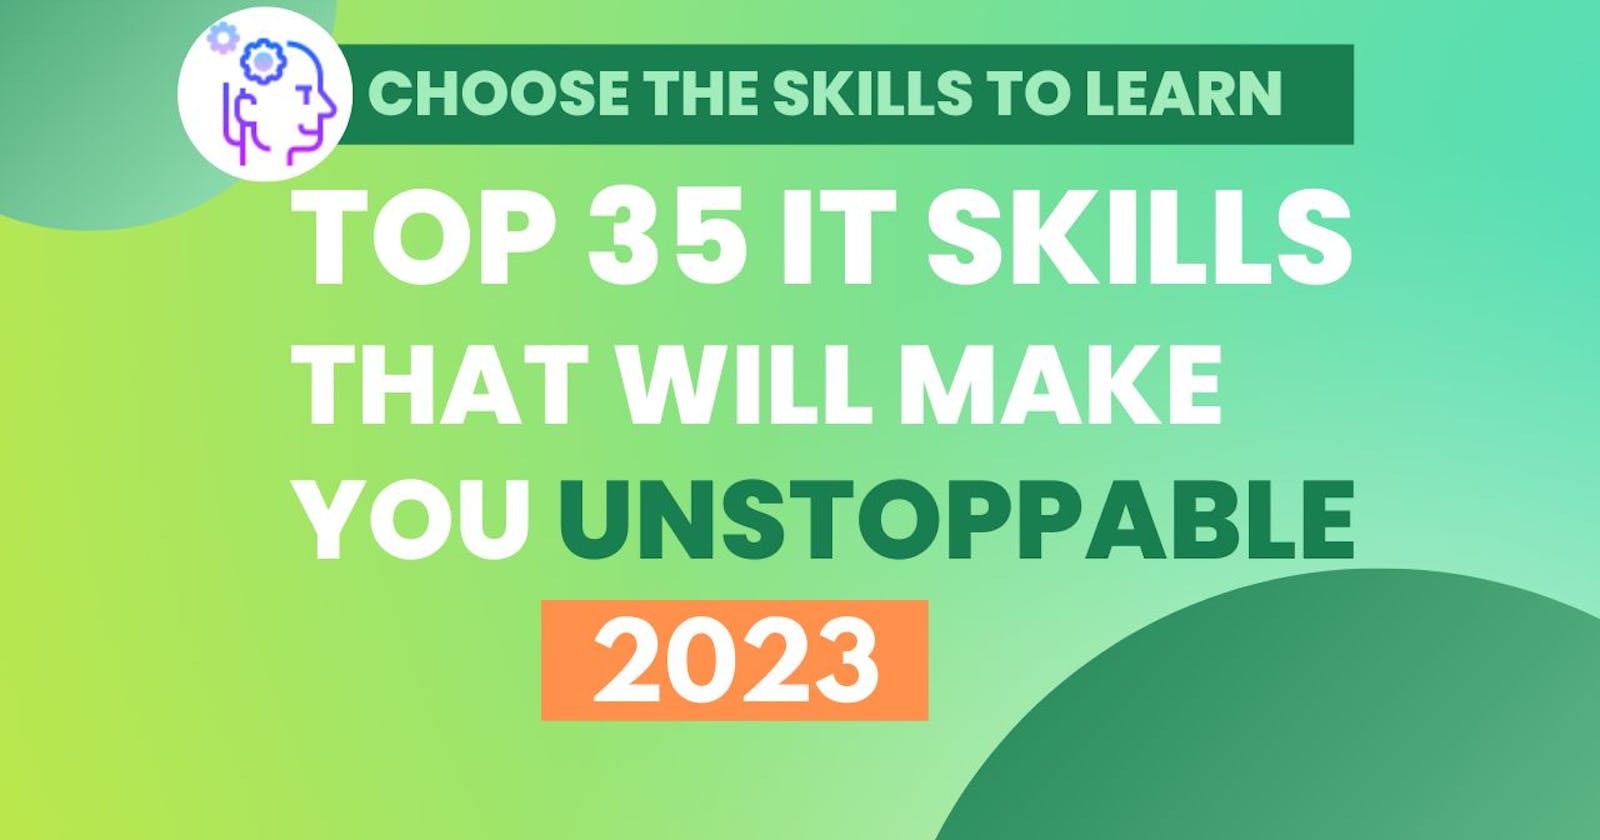 Top 35 IT Skills That Will Make You Unstoppable in 2023